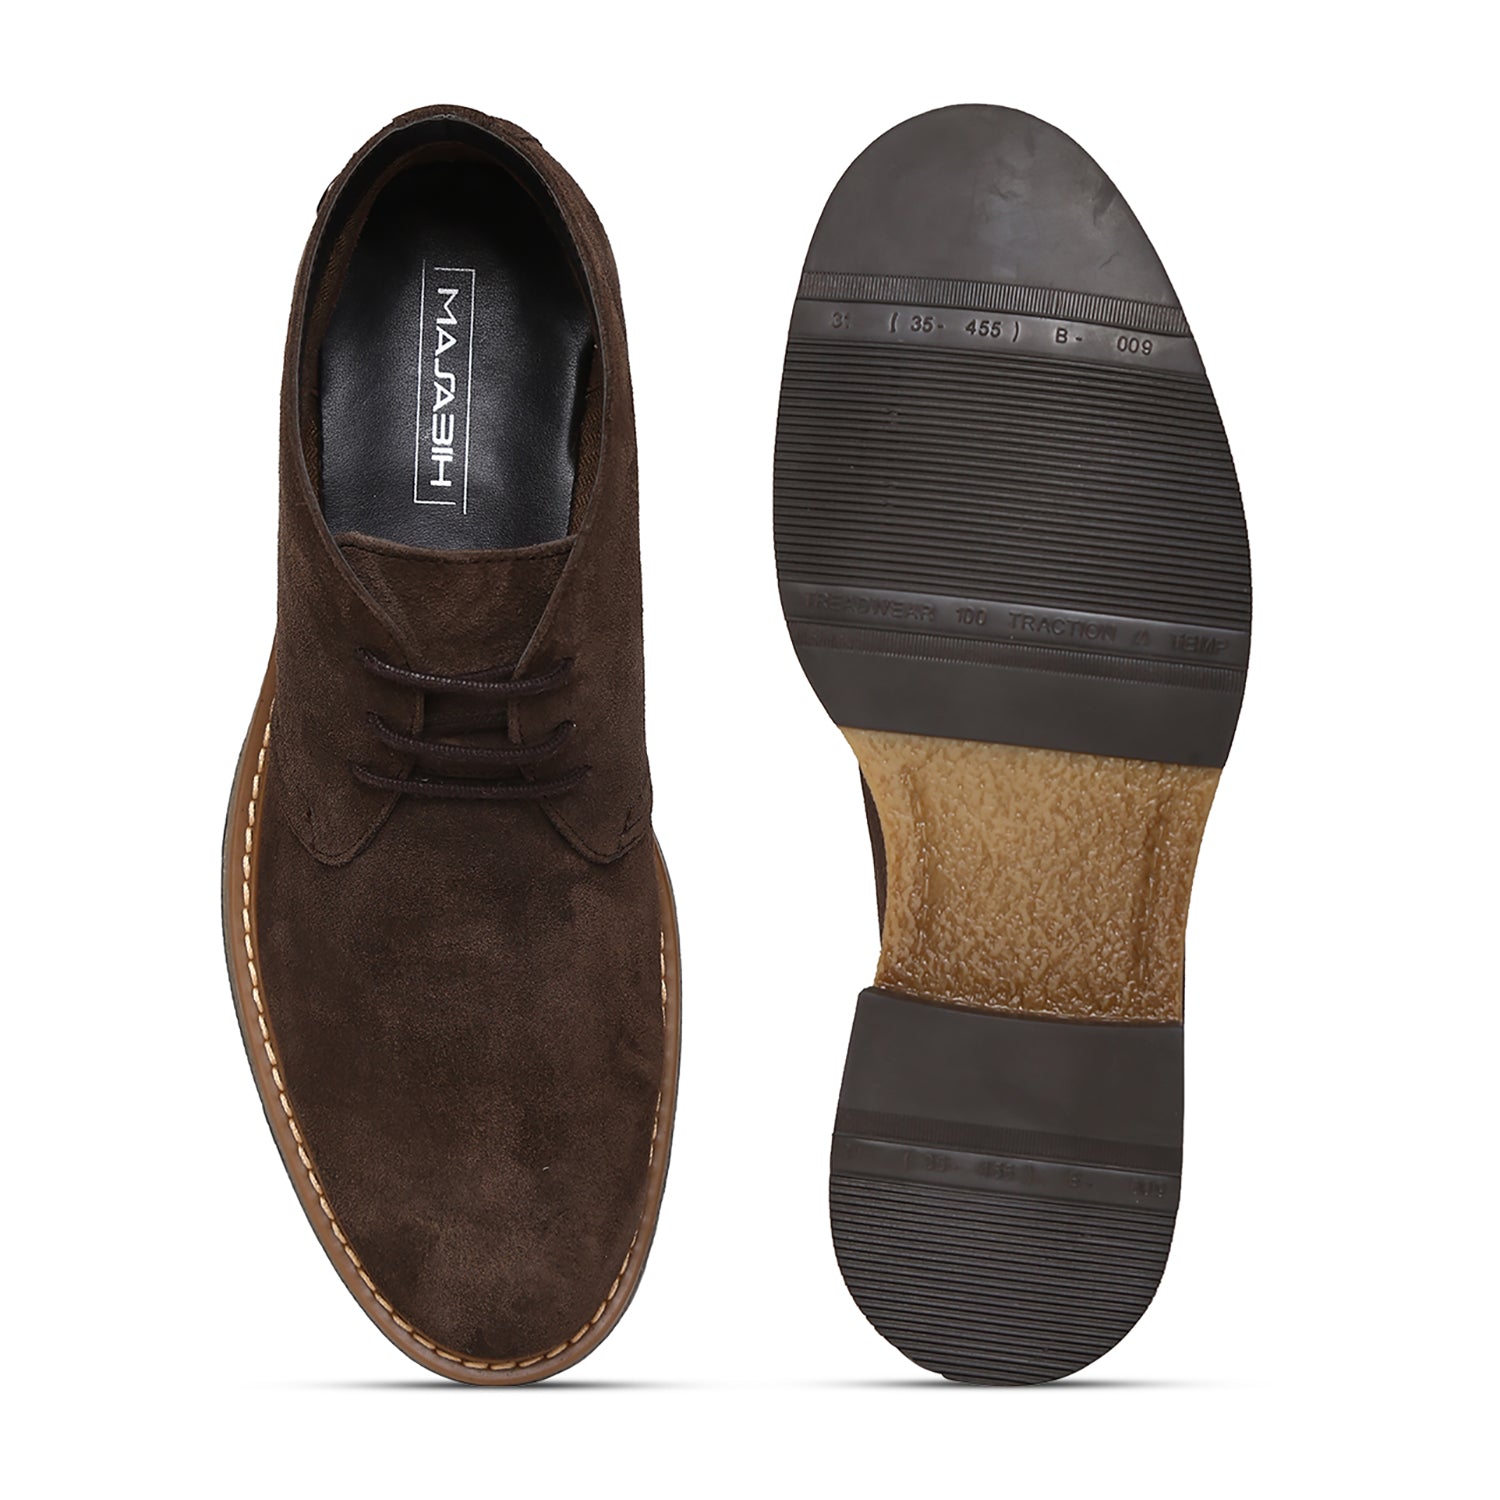 Brown Genuine Suede Leather Chukka Lace Up Boots For Men